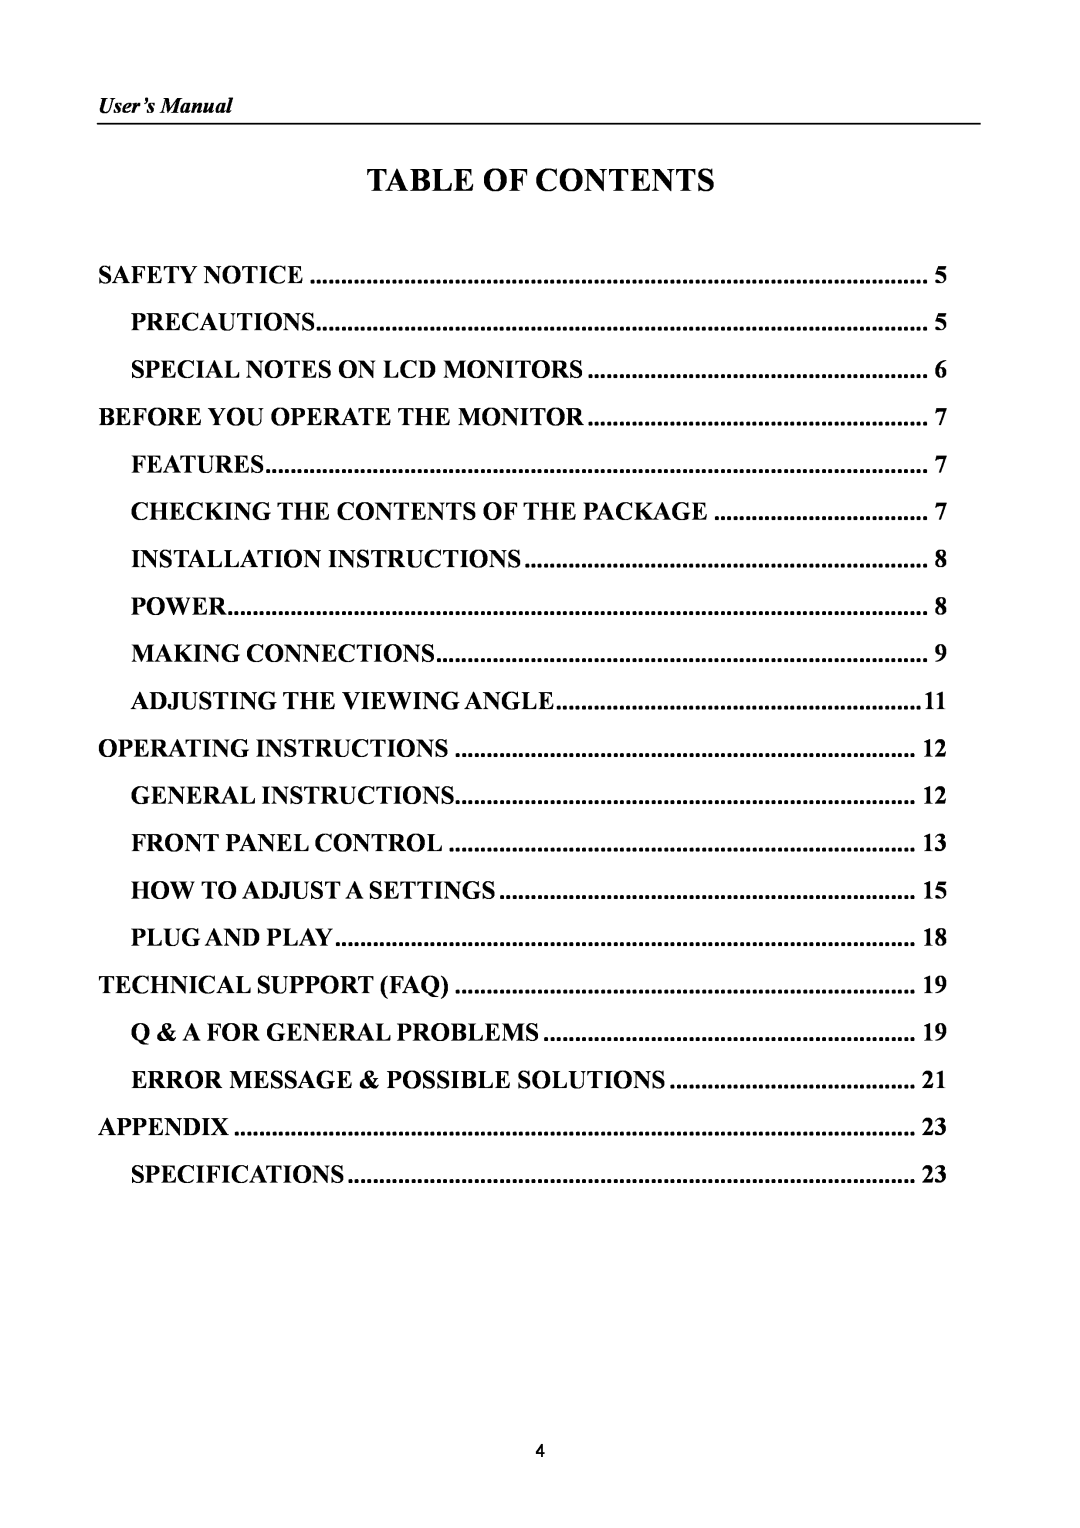 Hanns.G HH241, HSG1078 manual Table Of Contents, Error Message & Possible Solutions 